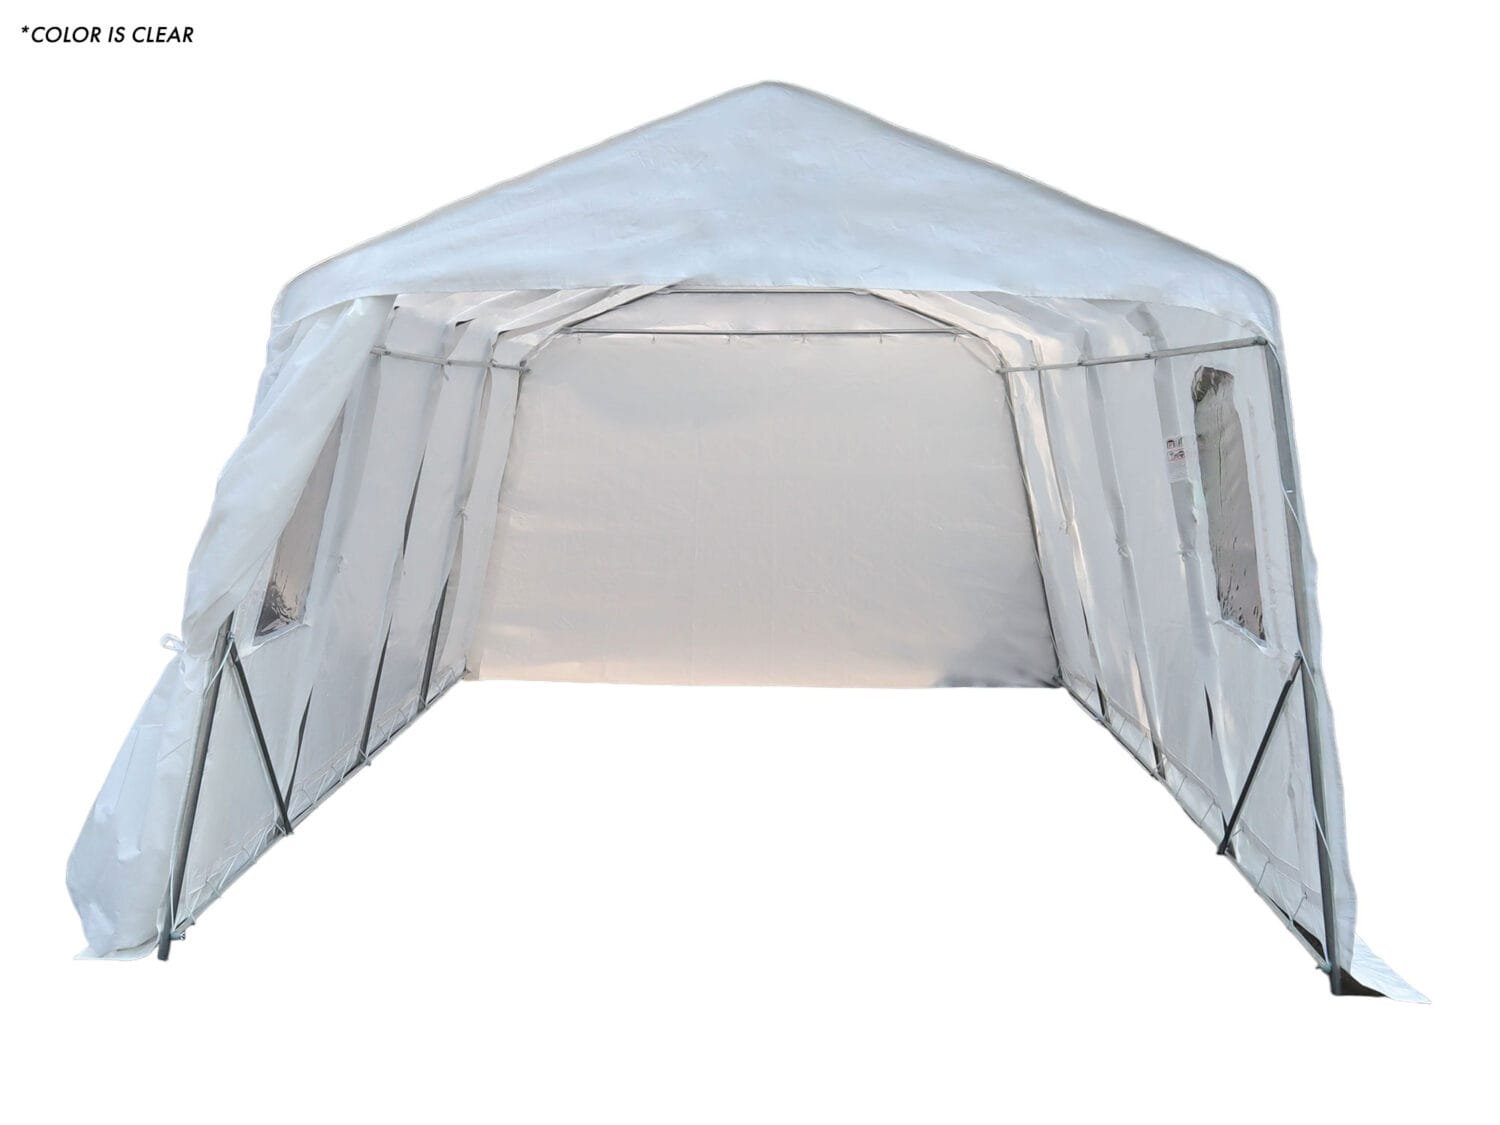 Car Shelter 11 ft. X 20 ft. ASM11x20 CLEAR 60051963136 (19)